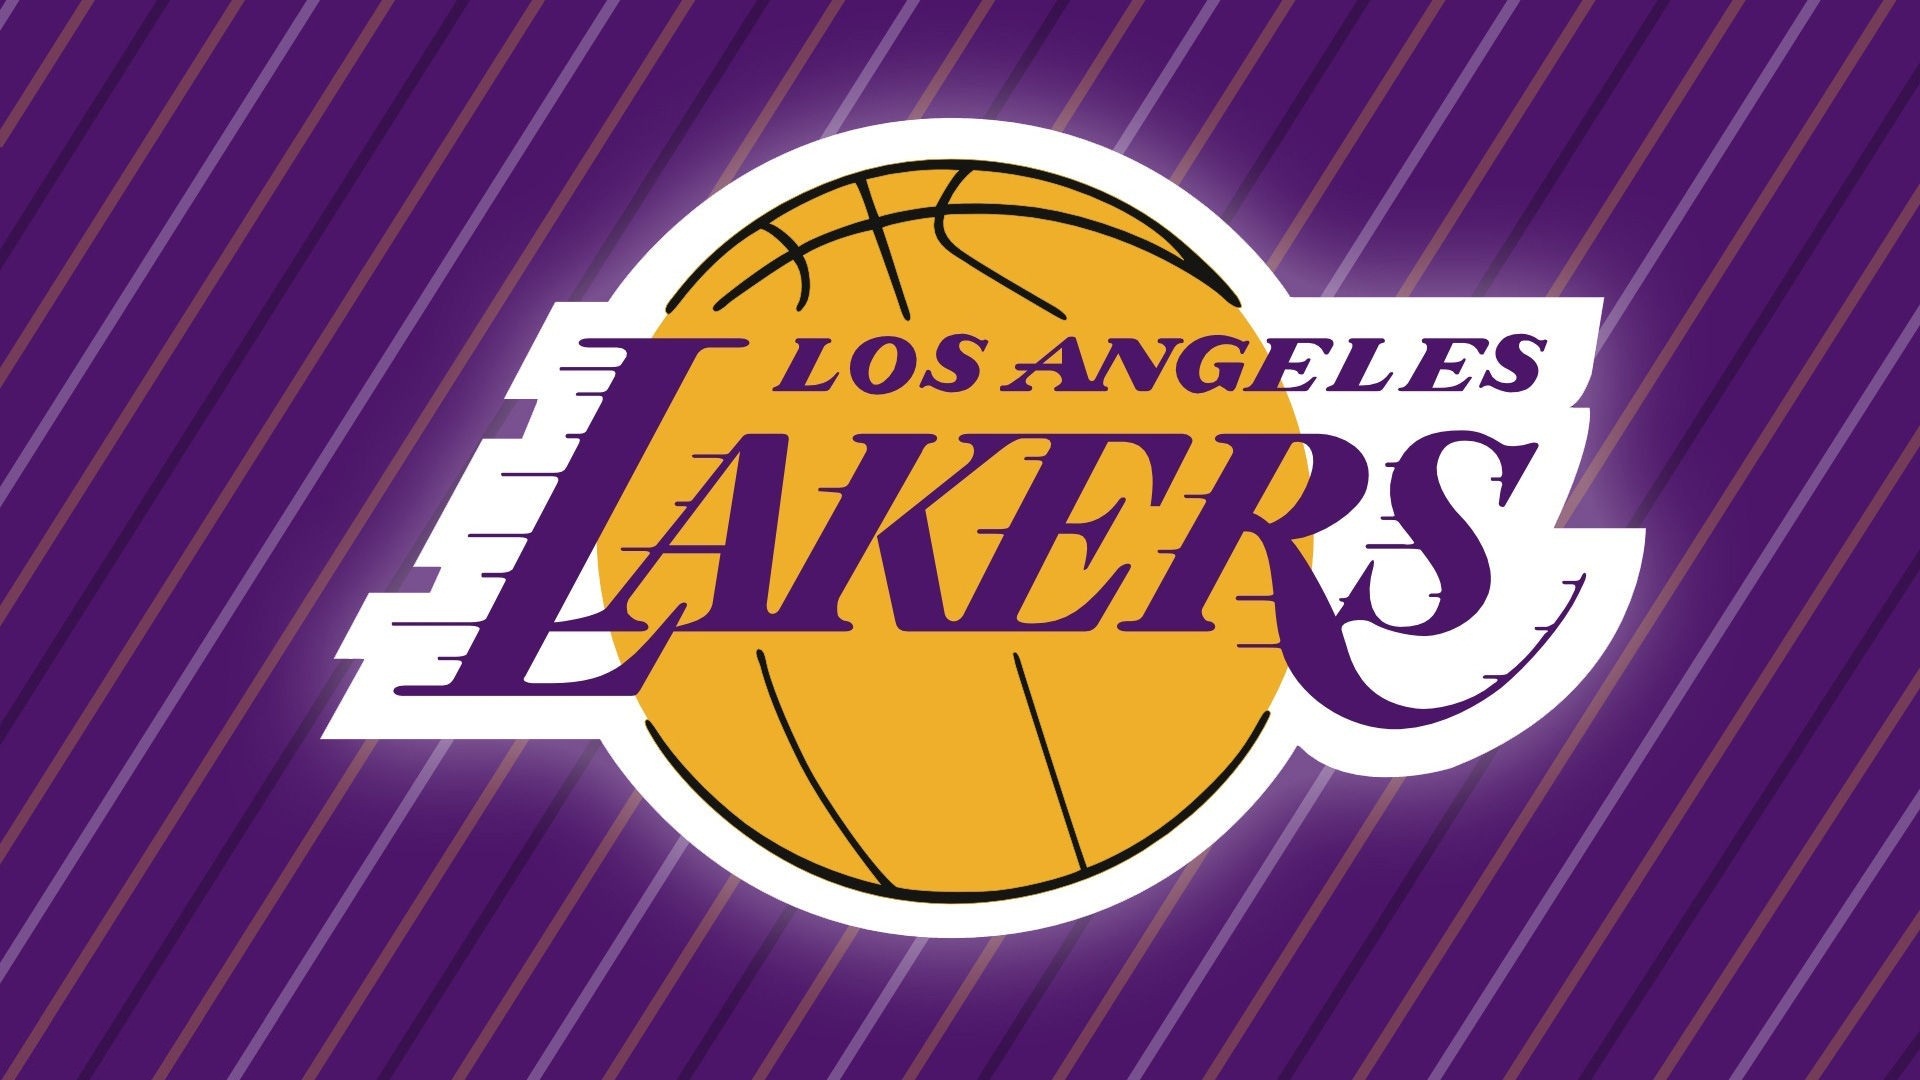 Los Angeles Lakers Desktop Wallpaper with image dimensions 1920x1080 pixel. You can make this wallpaper for your Desktop Computer Backgrounds, Windows or Mac Screensavers, iPhone Lock screen, Tablet or Android and another Mobile Phone device